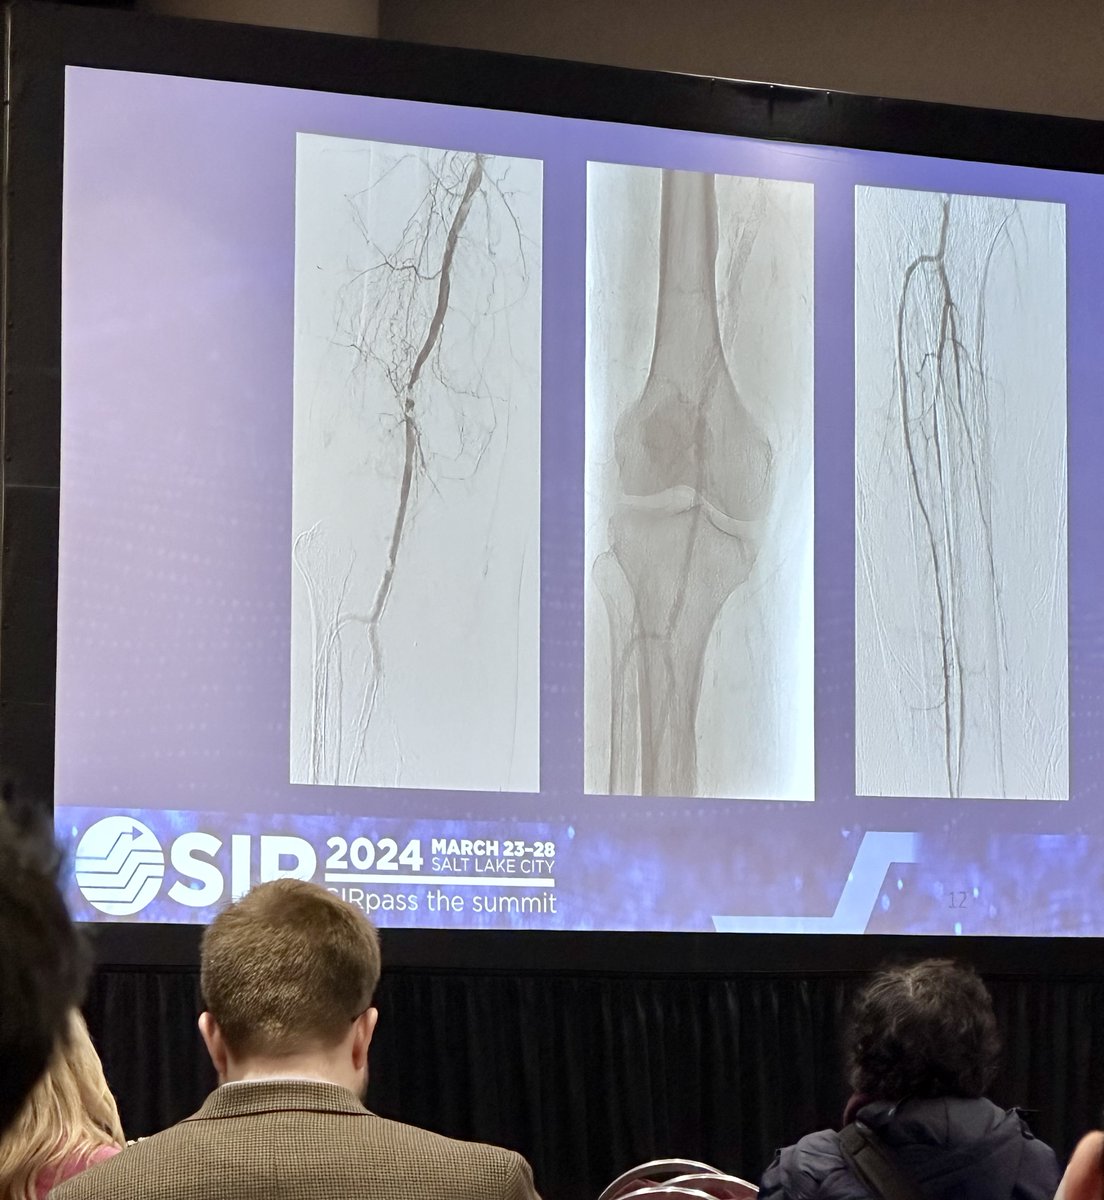 Great #ShockwaveIVL case presentation at #SIR24SLC by Dr @drvarshana. Dr Gurusamy reviewed a calcified popliteal case where she improved inflow to the foot with IVL. US Rx only. ISI bit.ly/3iEq7fC #IRad @SIRspecialists